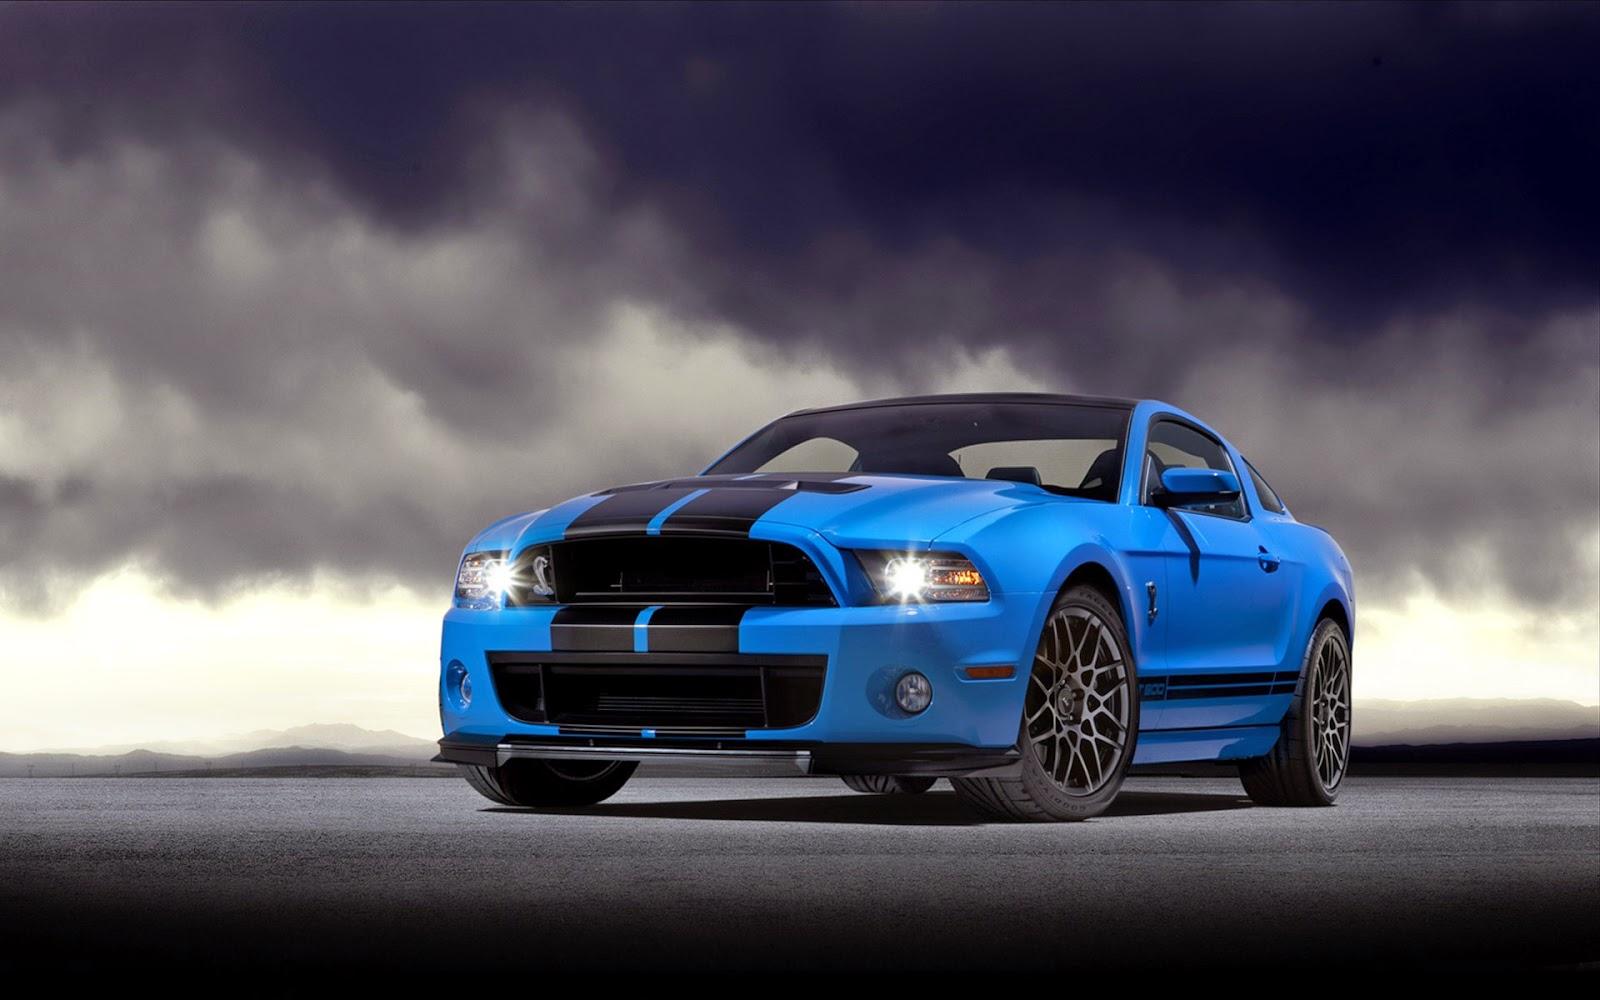 Best Ford Mustang Shelby Cobra Wallpaper Model. Review Cars 2019